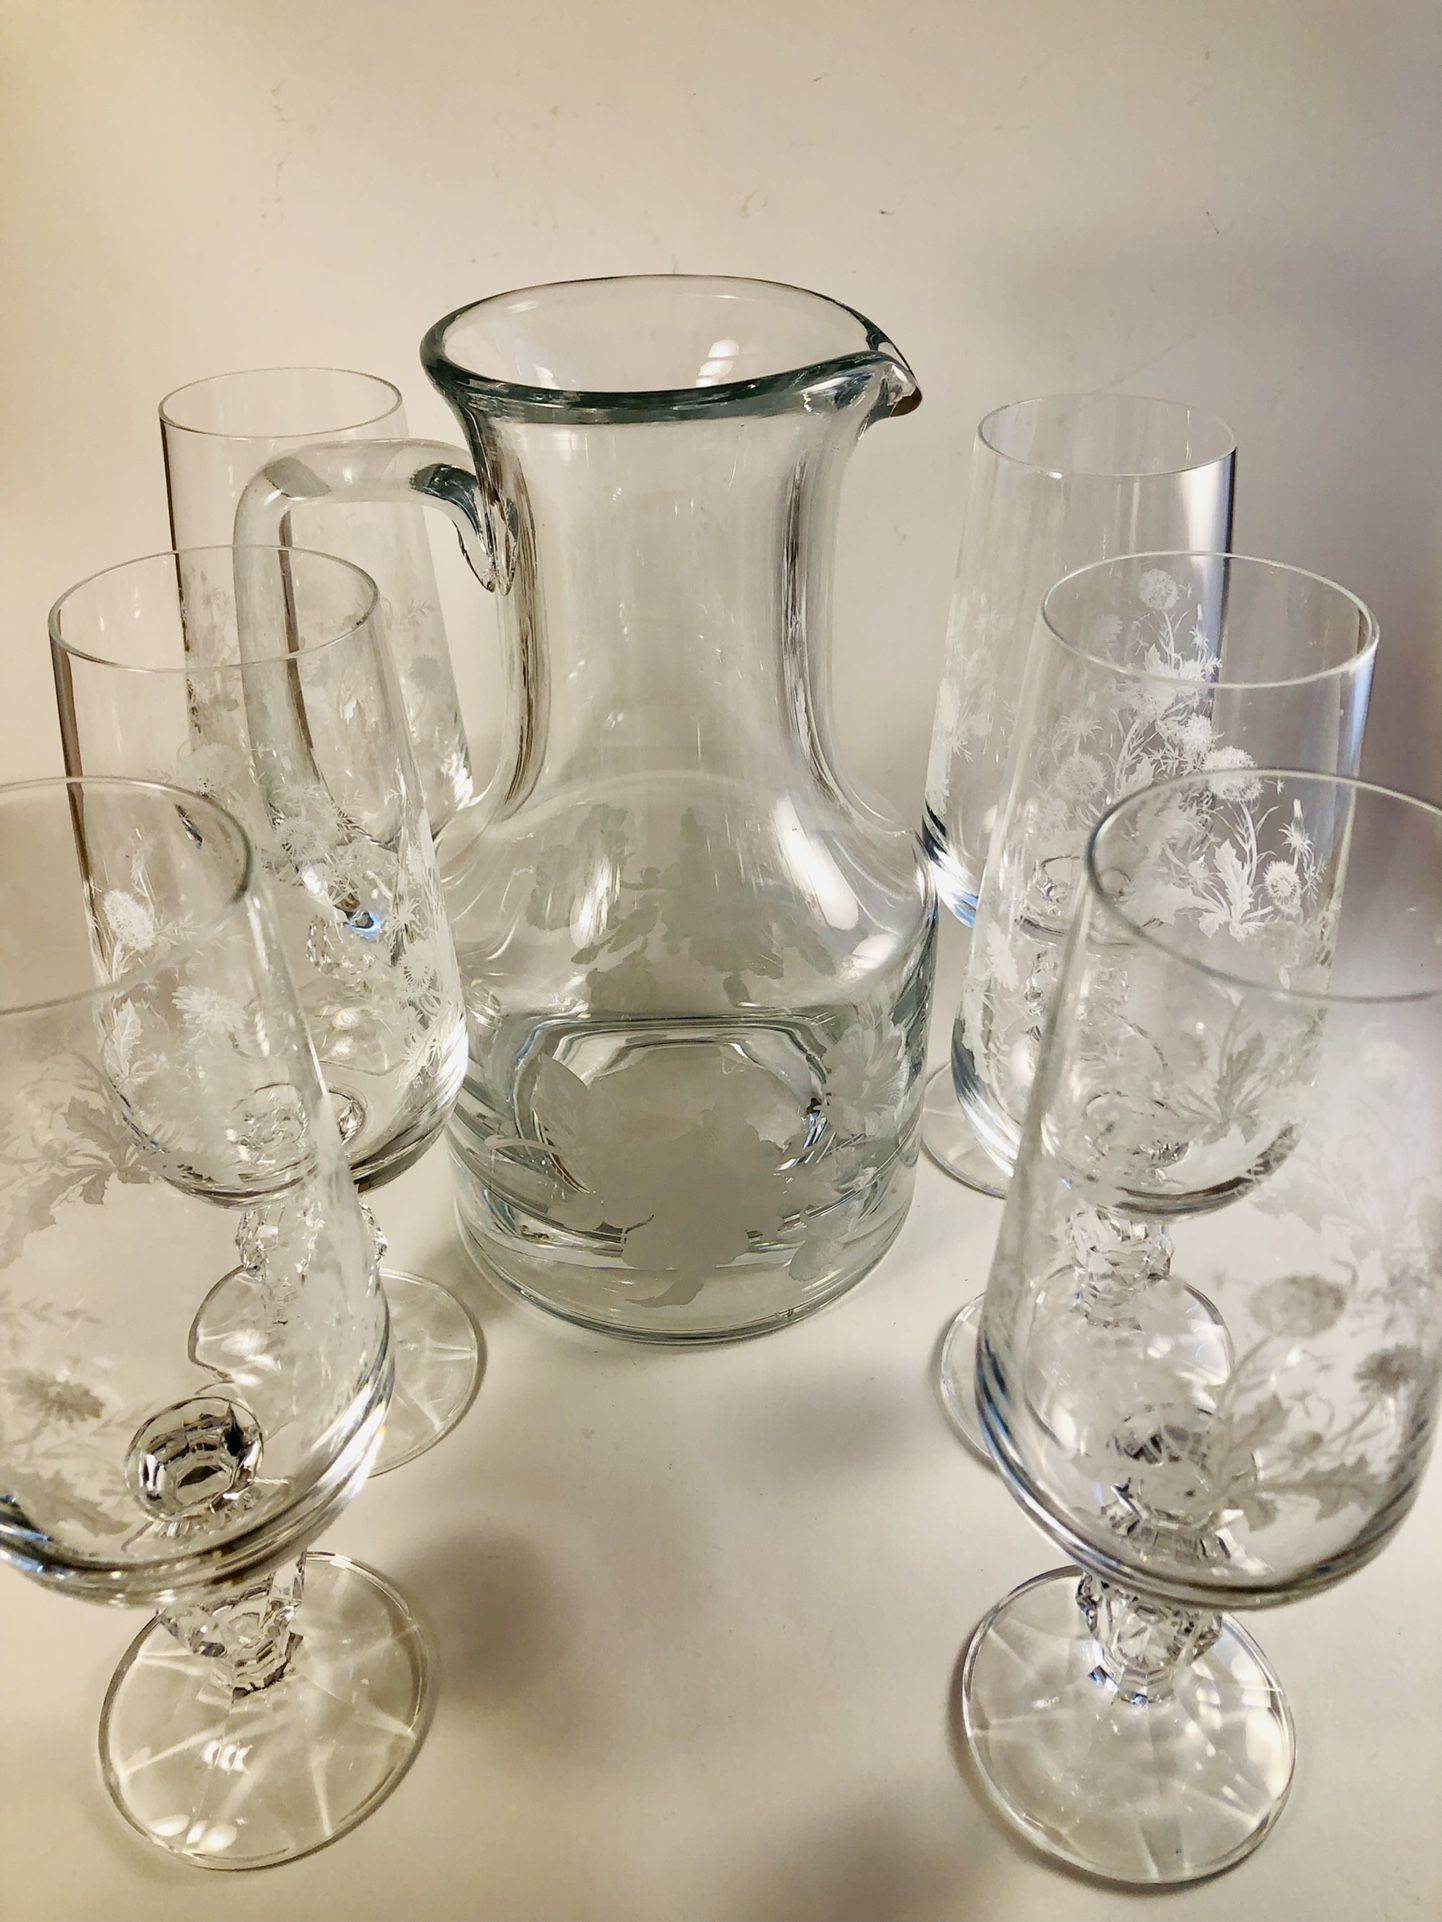 Antique Crystal Pitchter and Glasses.  White etched flowers on all, 7 Goblets 1 pitcher 